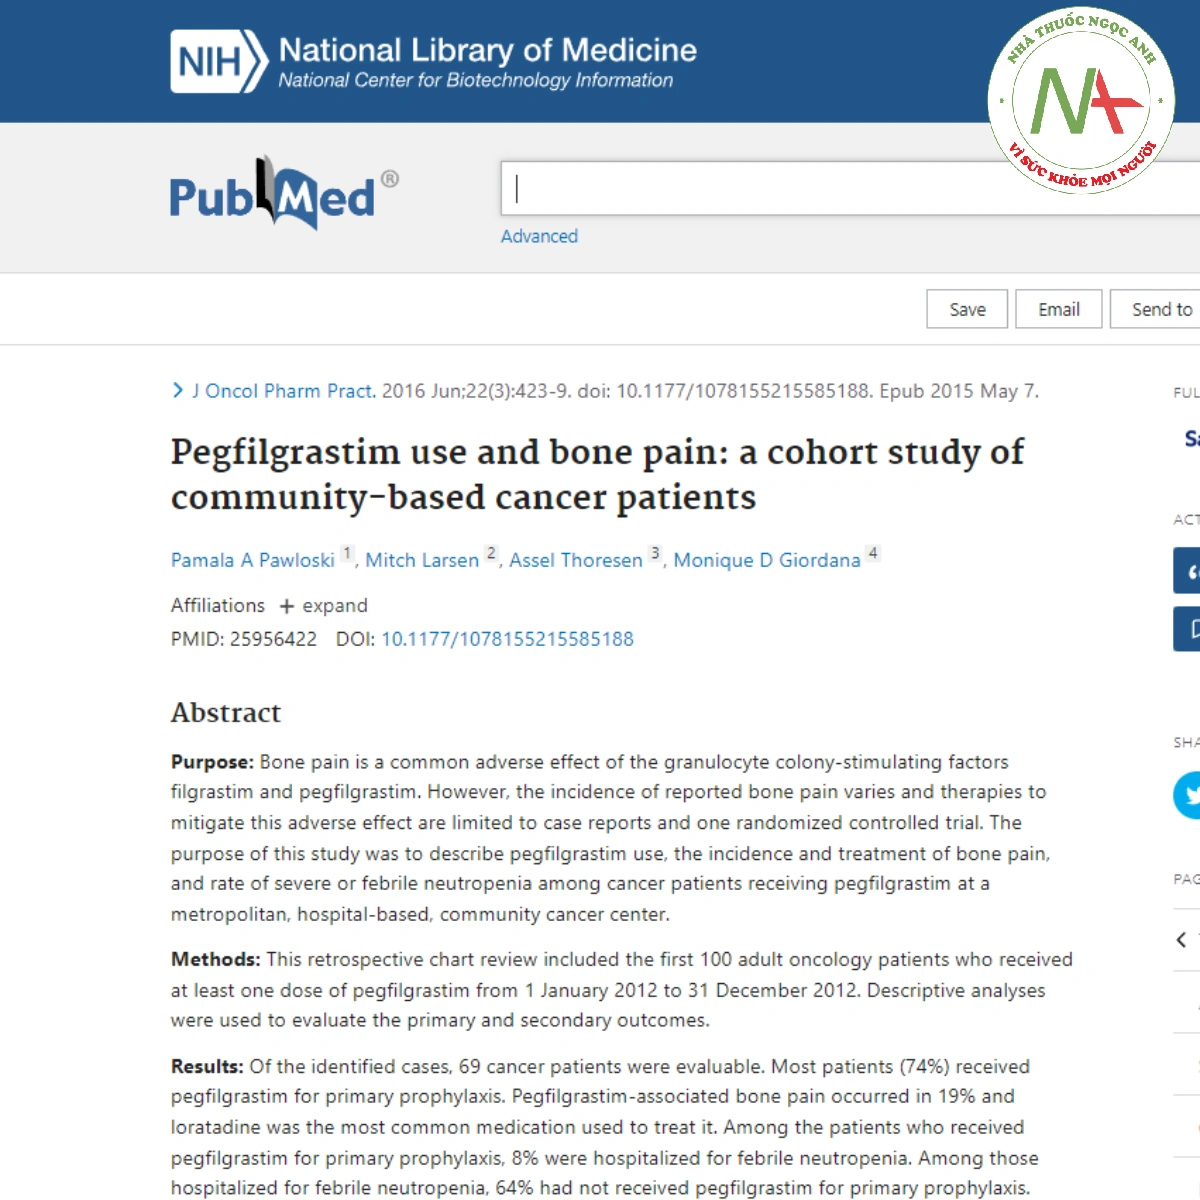 Pegfilgrastim use and bone pain_ a cohort study of community-based cancer patients